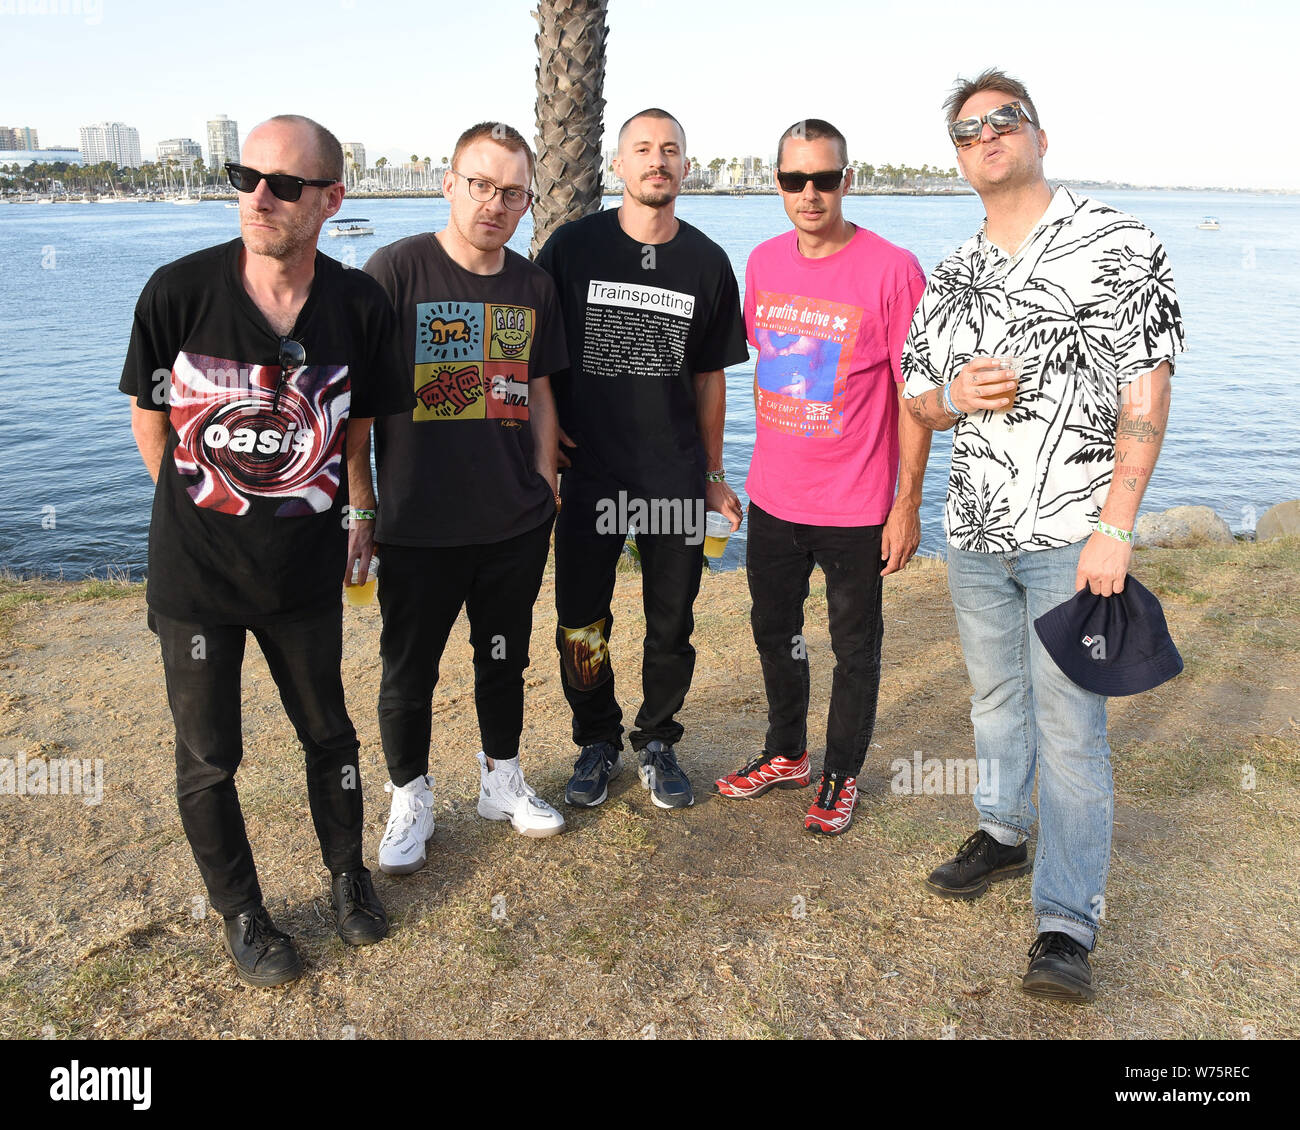 Matt Maust, Matthew Schwartz, David Quon, Joe Plummer and Nathan Willett of the band Cold War Kids pose for a portrait backstage at the ALT 98.7 Summer Camp at the Queen Mary in Long Beach on August 3, 2019. performs at ALT 98.7 Summer Camp at the Queen Mary in Long Beach on August 3, 2019. Stock Photo